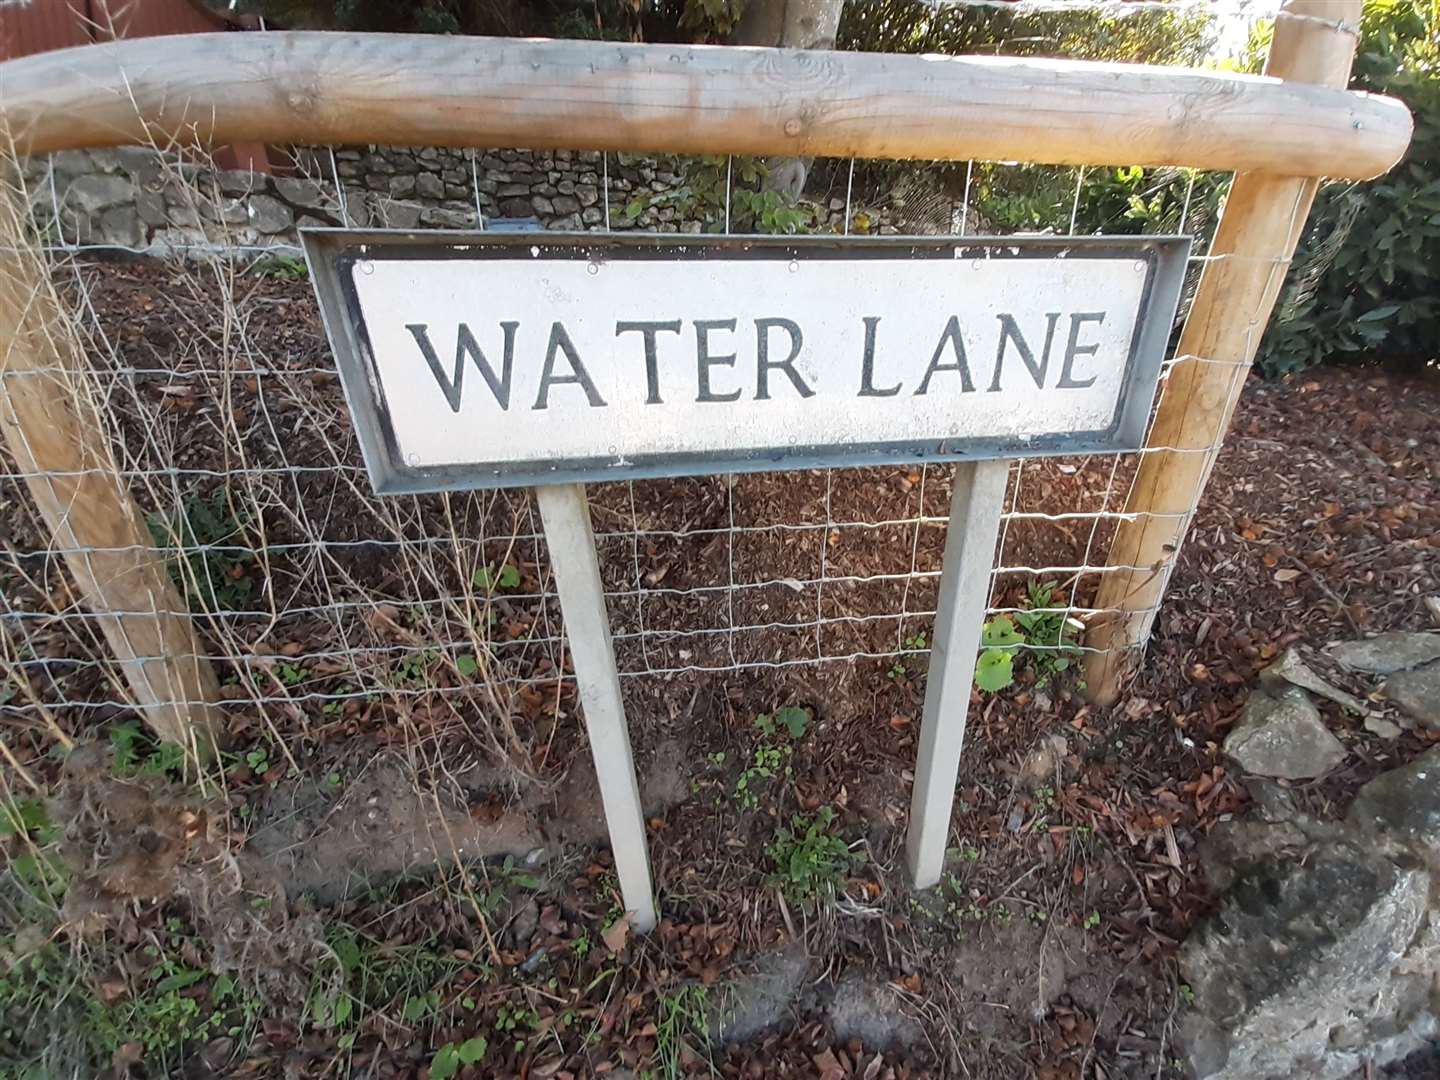 Water Lane, scene of the trouble